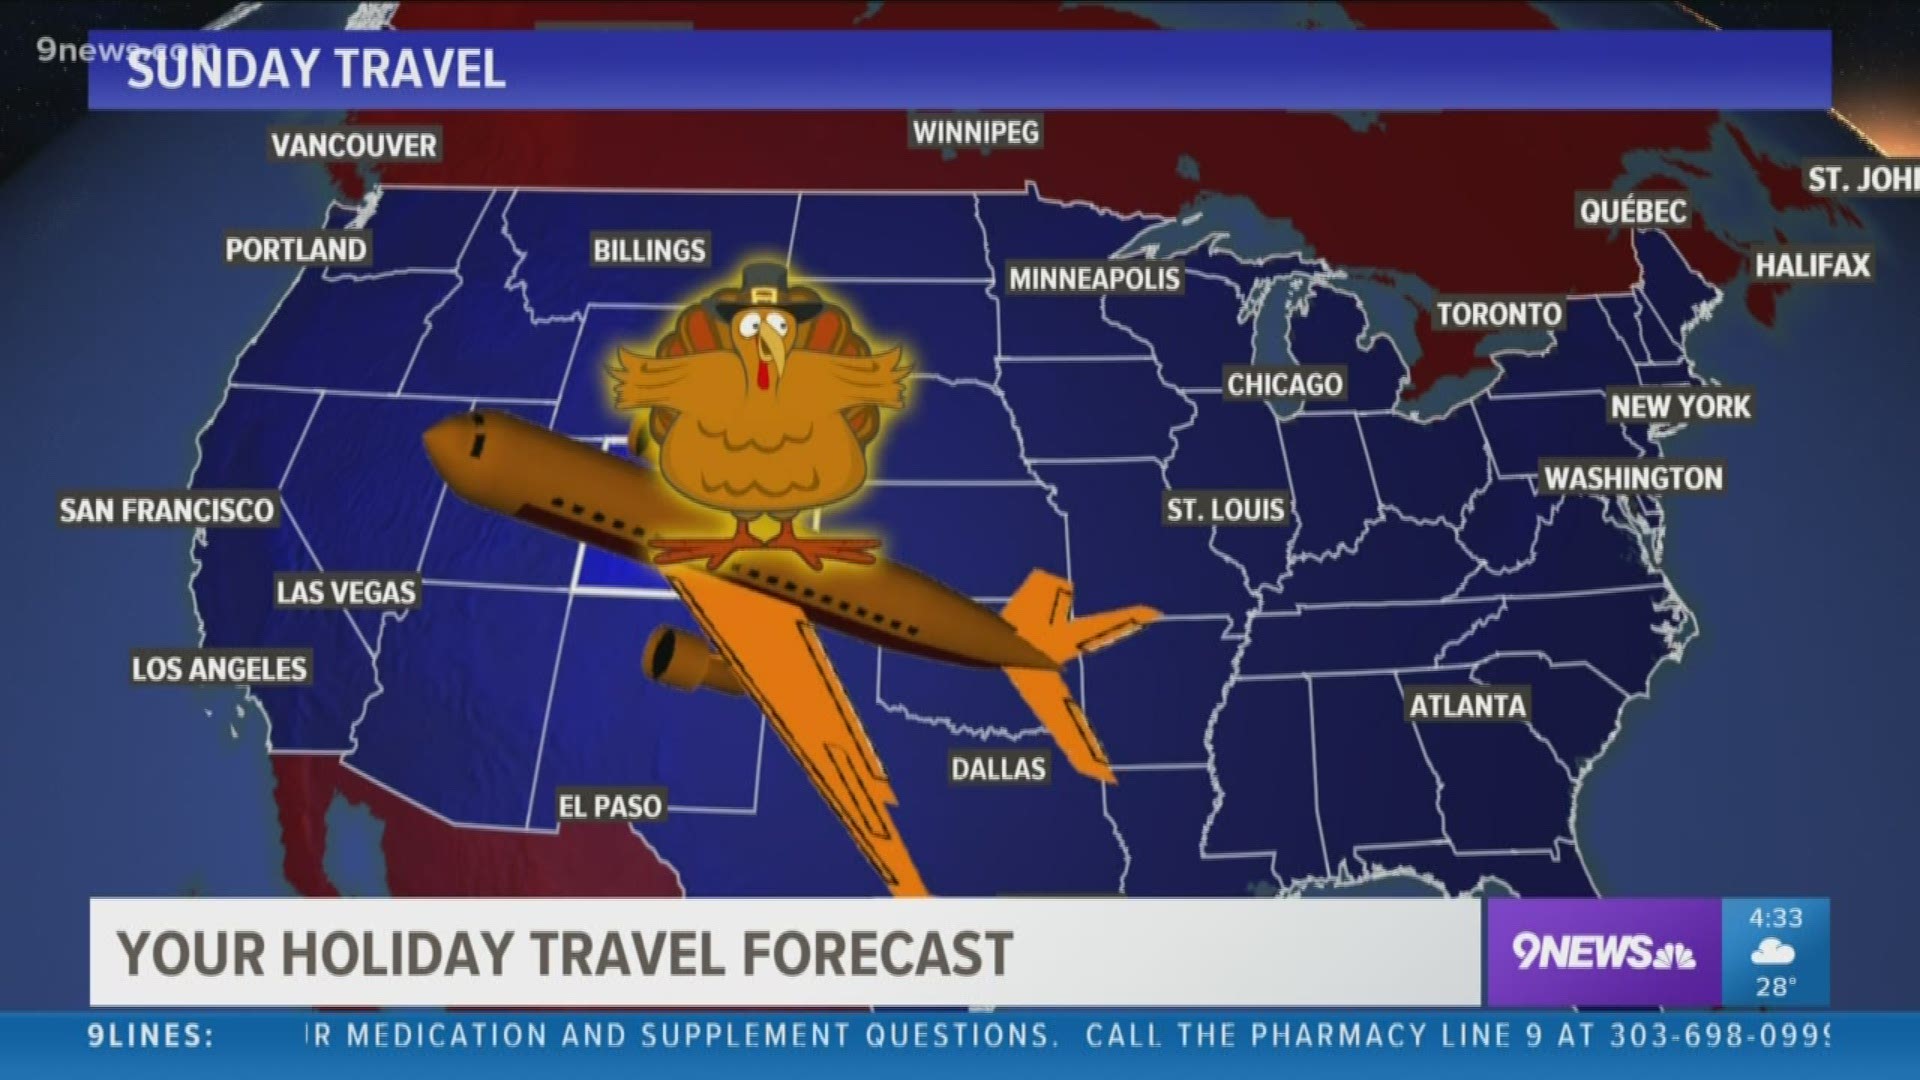 Weather could impact Thanksgiving travel plans across the country. Several different storms are forecast to hit the U.S. over the holiday.